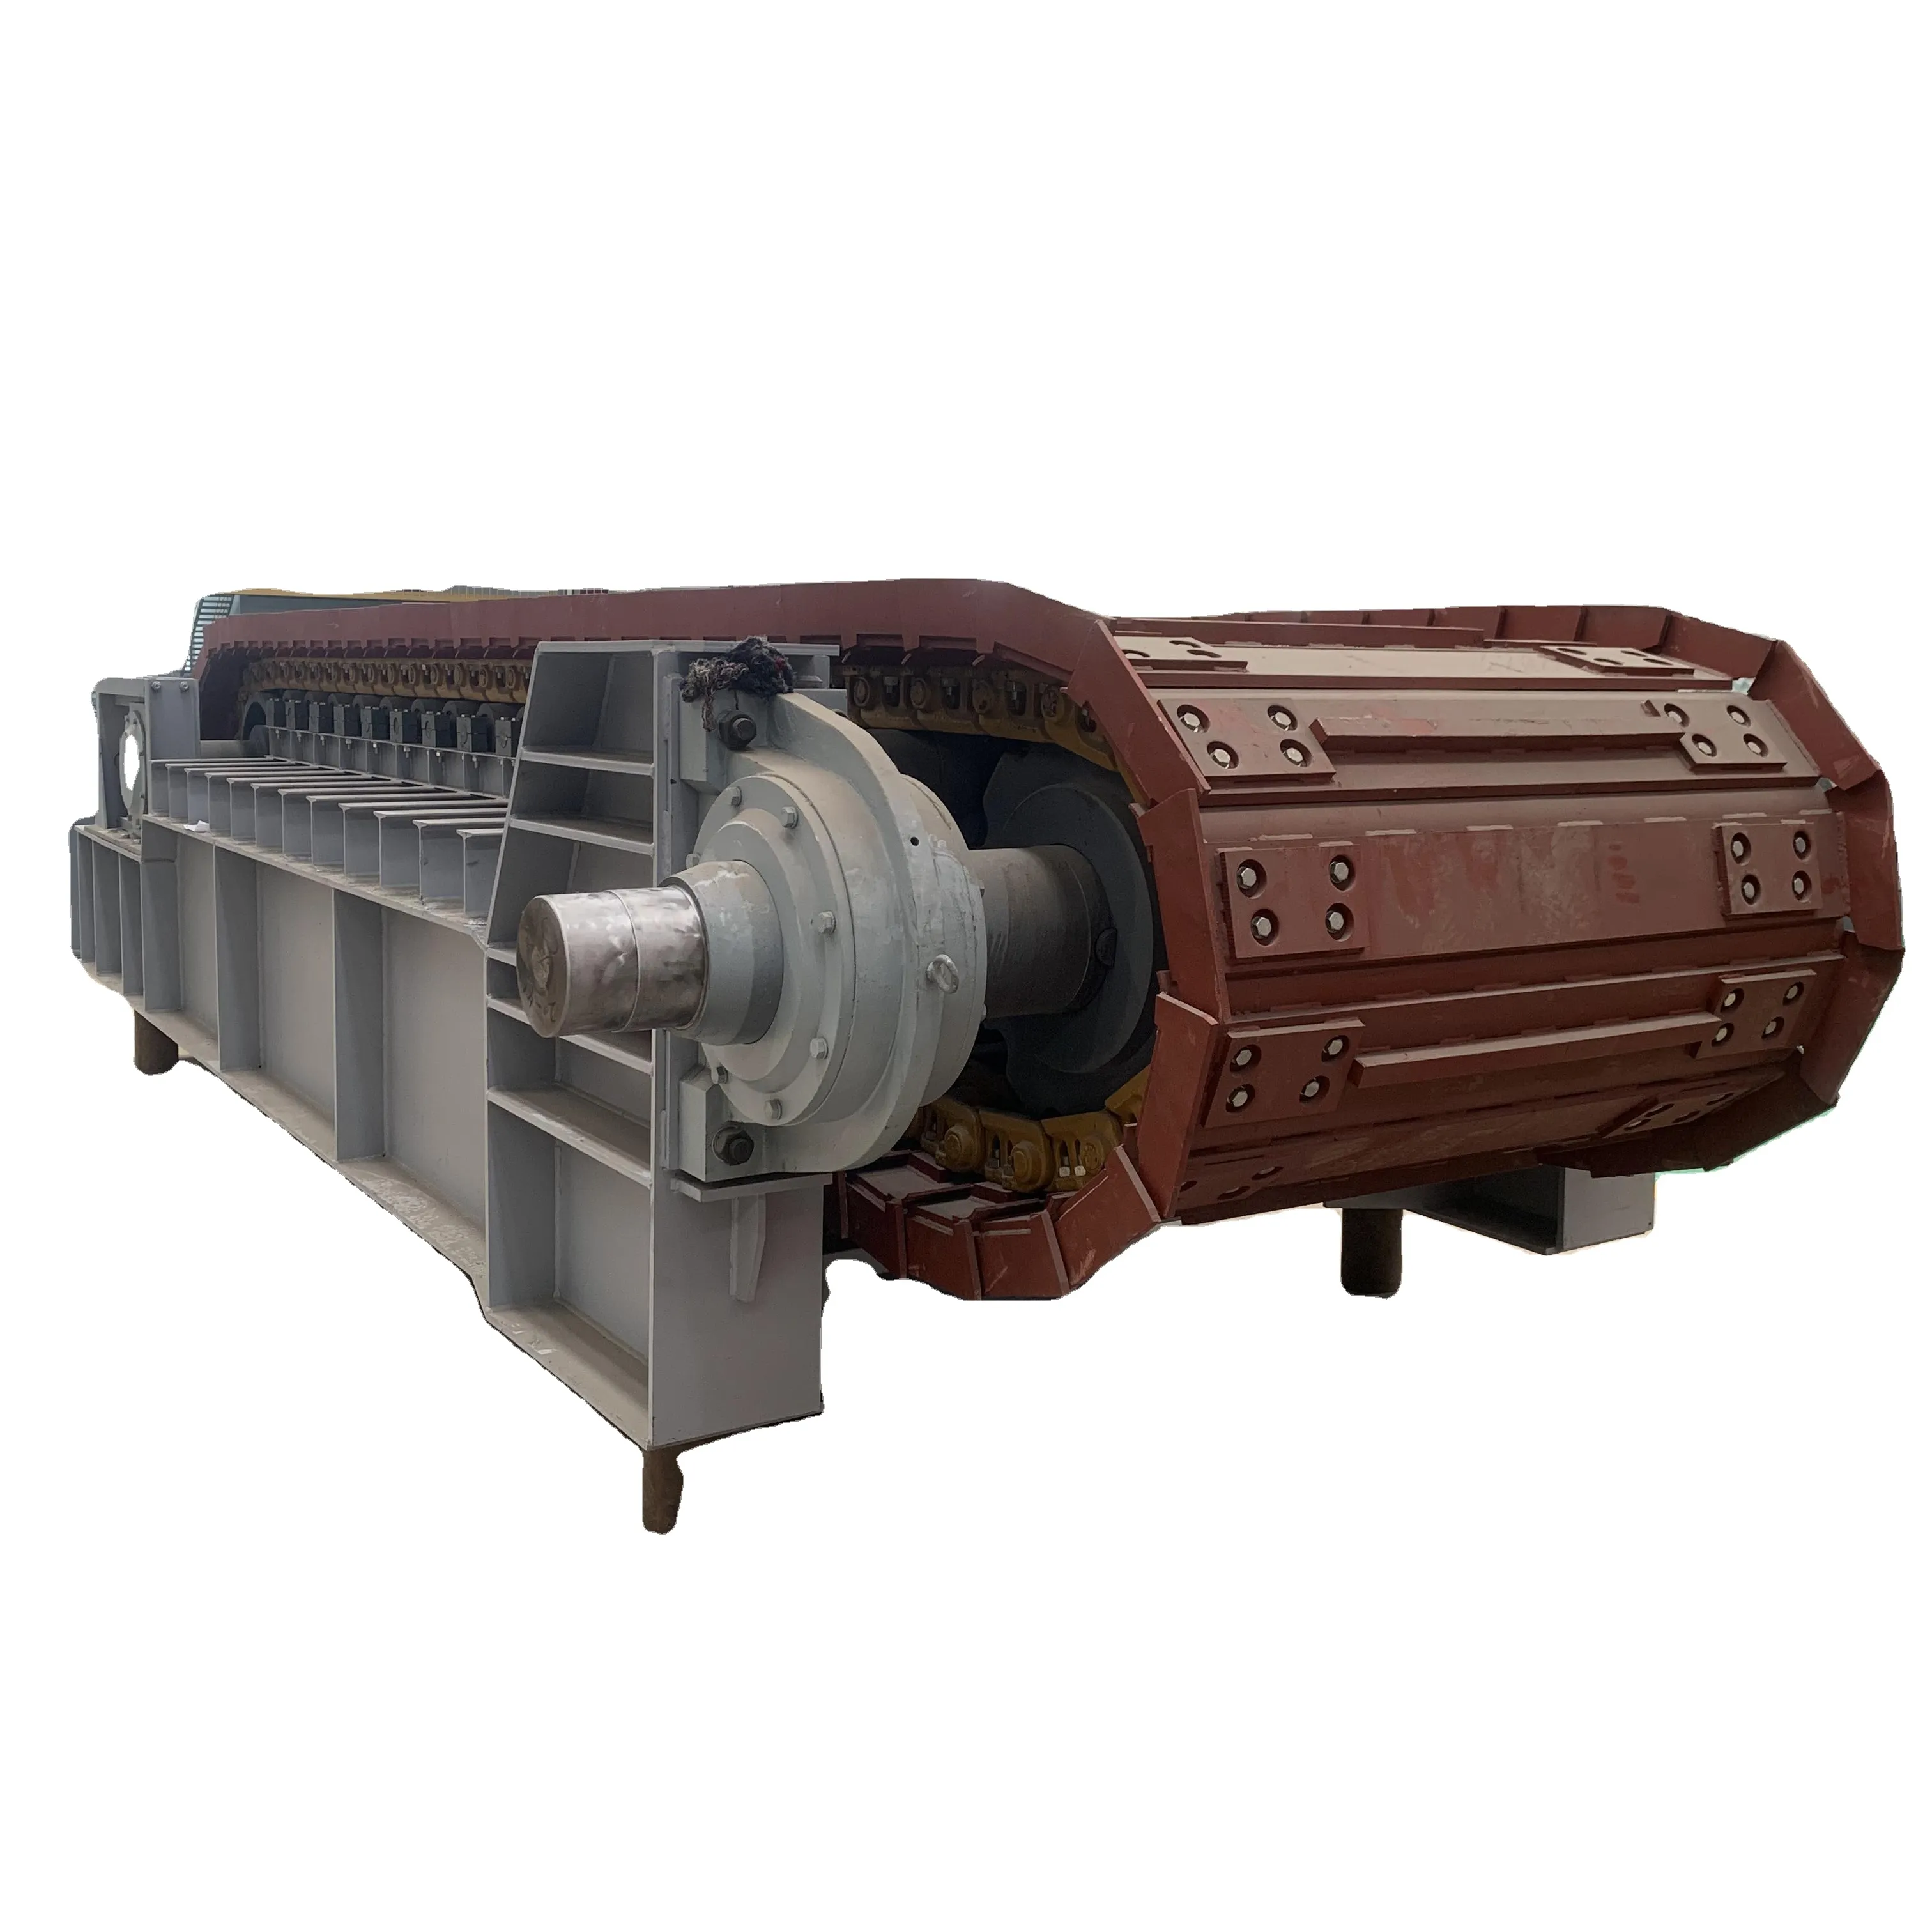 BL1200 plate feeder medium apron feeder building materials metallurgy electric power coal chemical industry foundry cement